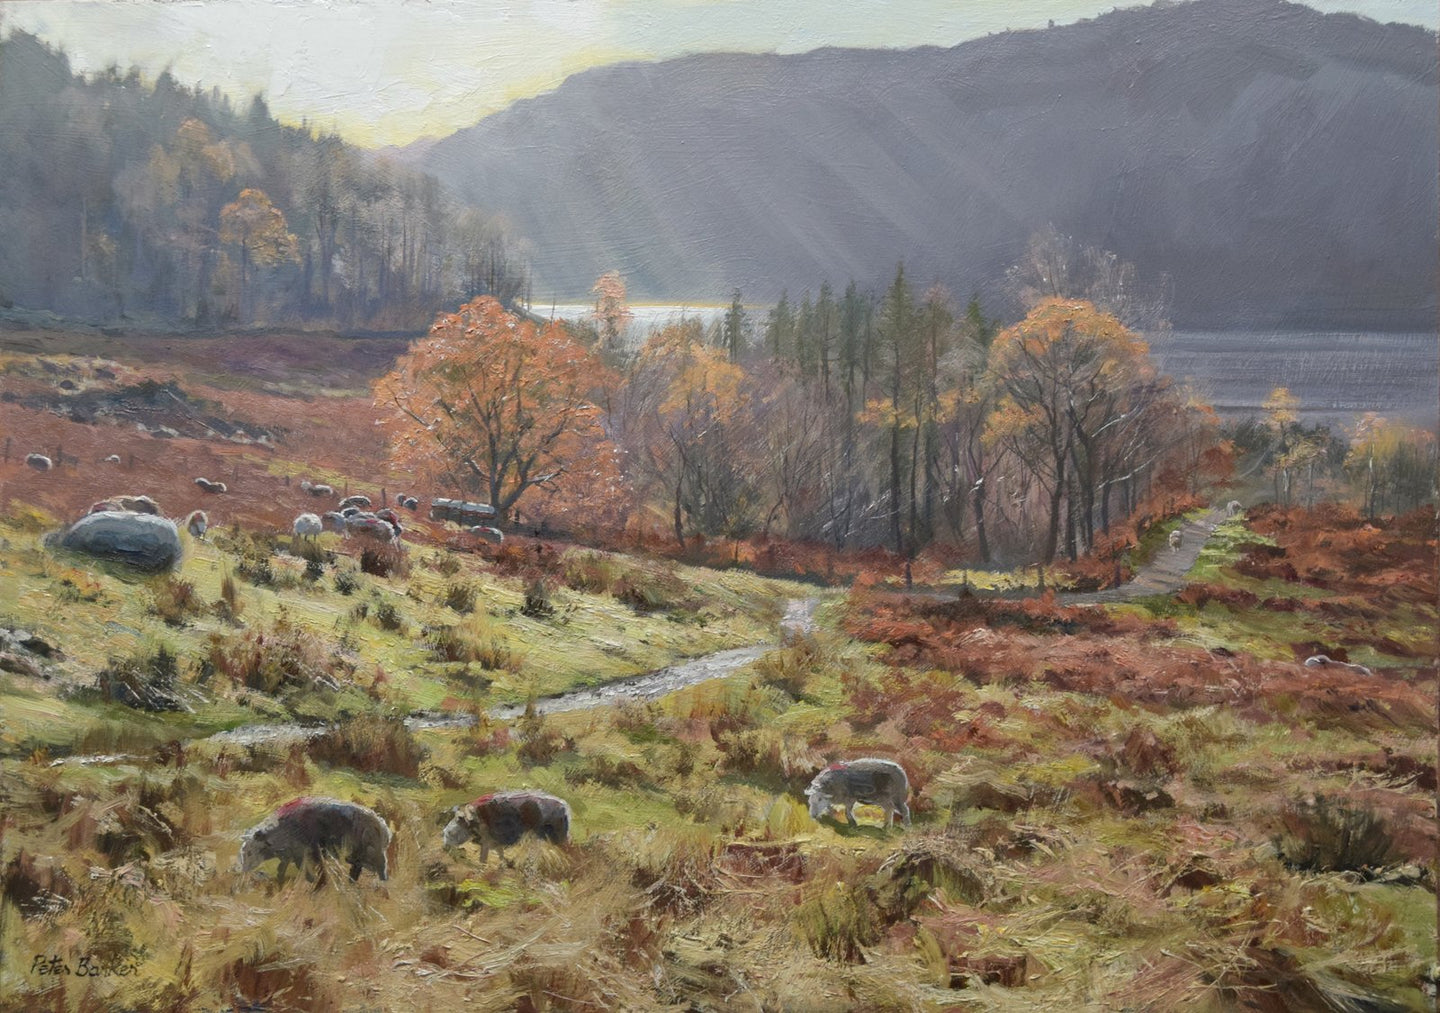 14 x 20 inch oil of a herd of Herdwick sheep on the fells by Thirlmere, looking into the sunlight, mountains in the distance blue/grey.